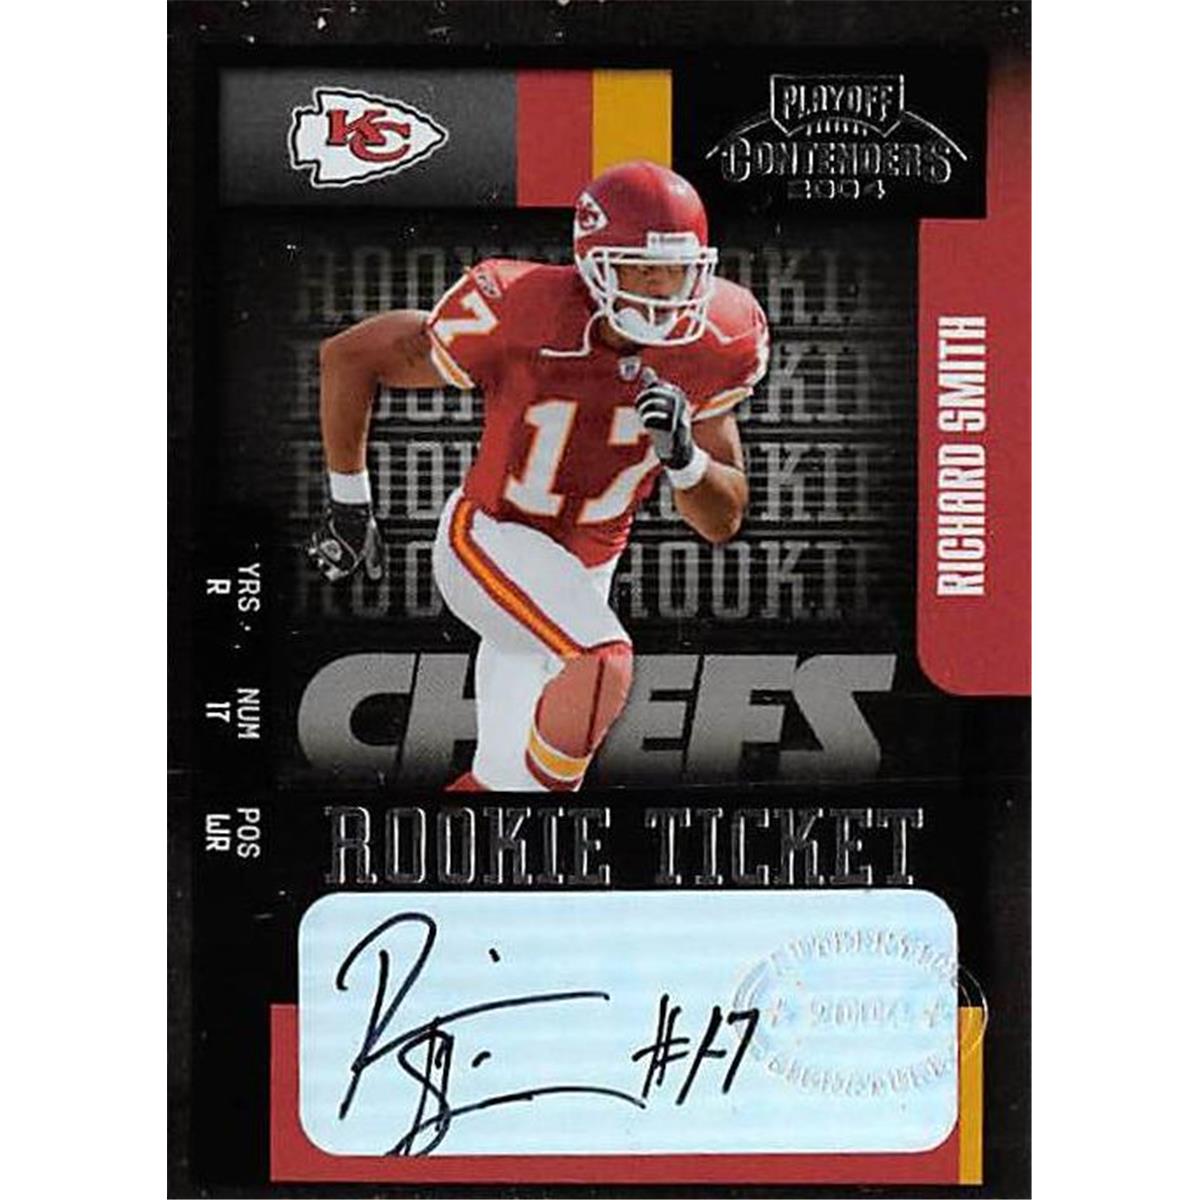 Picture of Autograph Warehouse 366588 Richard Smith Autographed Football Card - Kansas City Chiefs 2004 Playoff Contenders No.184 Rookie